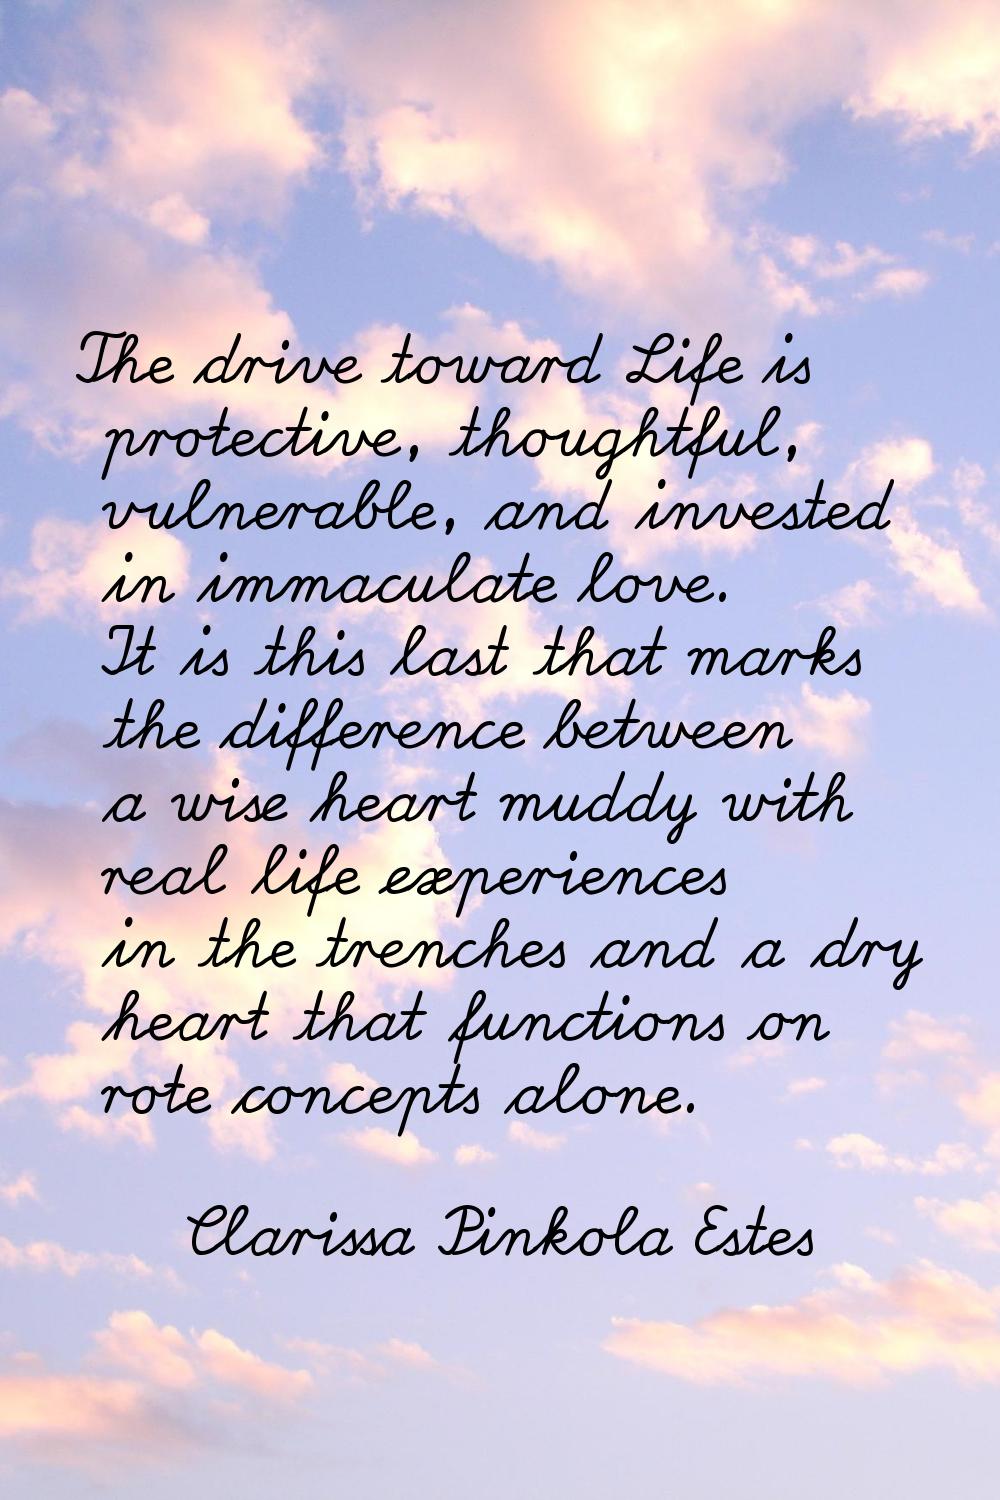 The drive toward Life is protective, thoughtful, vulnerable, and invested in immaculate love. It is